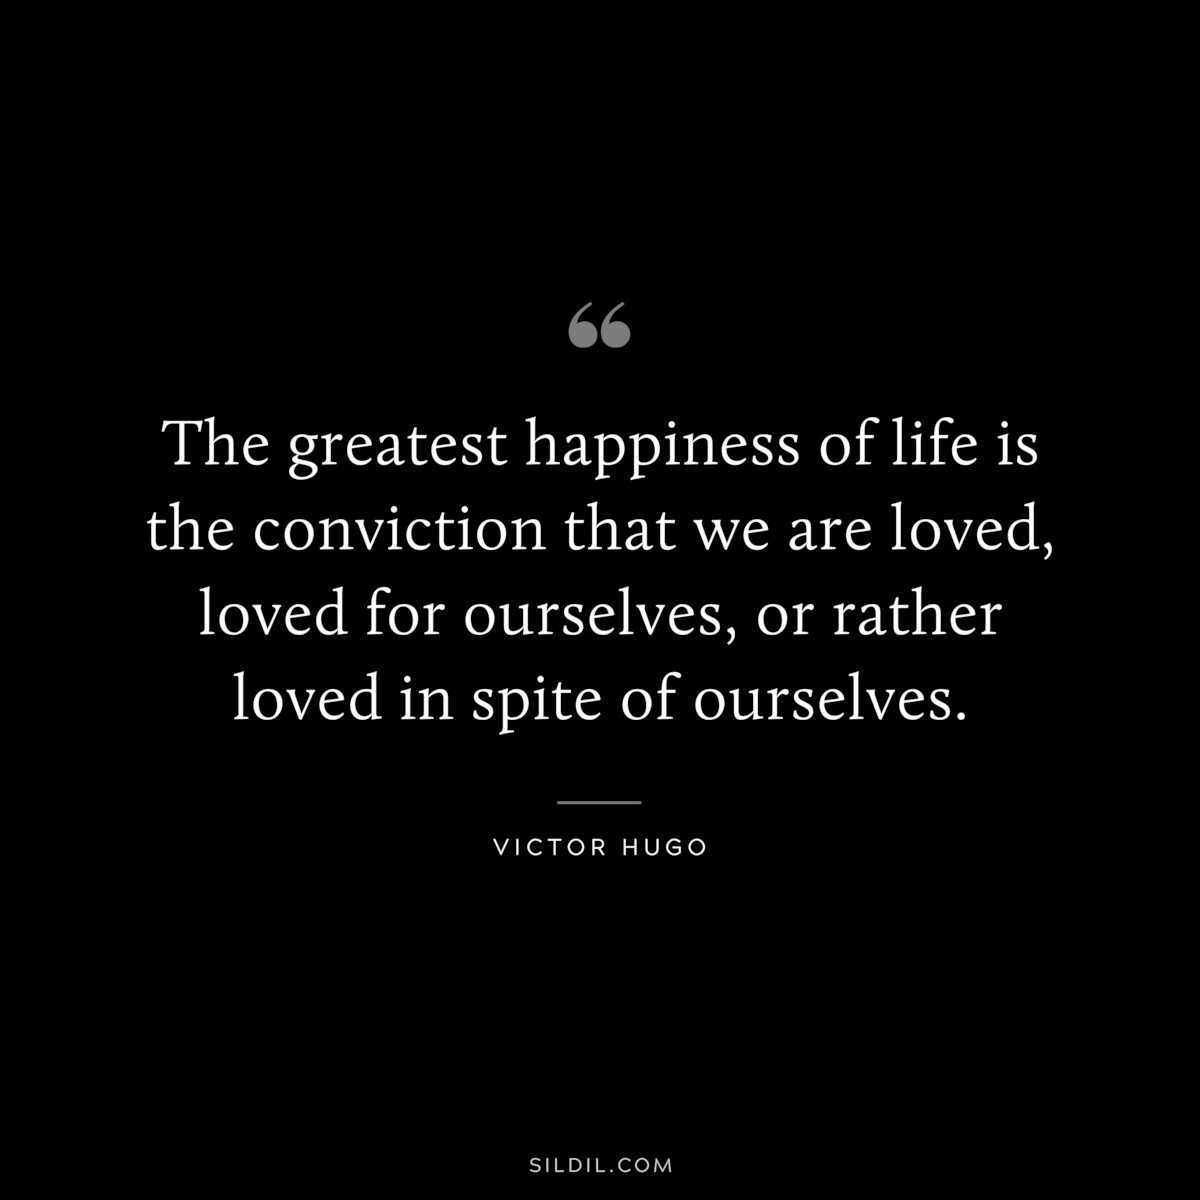 The greatest happiness of life is the conviction that we are loved, loved for ourselves, or rather loved in spite of ourselves.― Victor Hugo